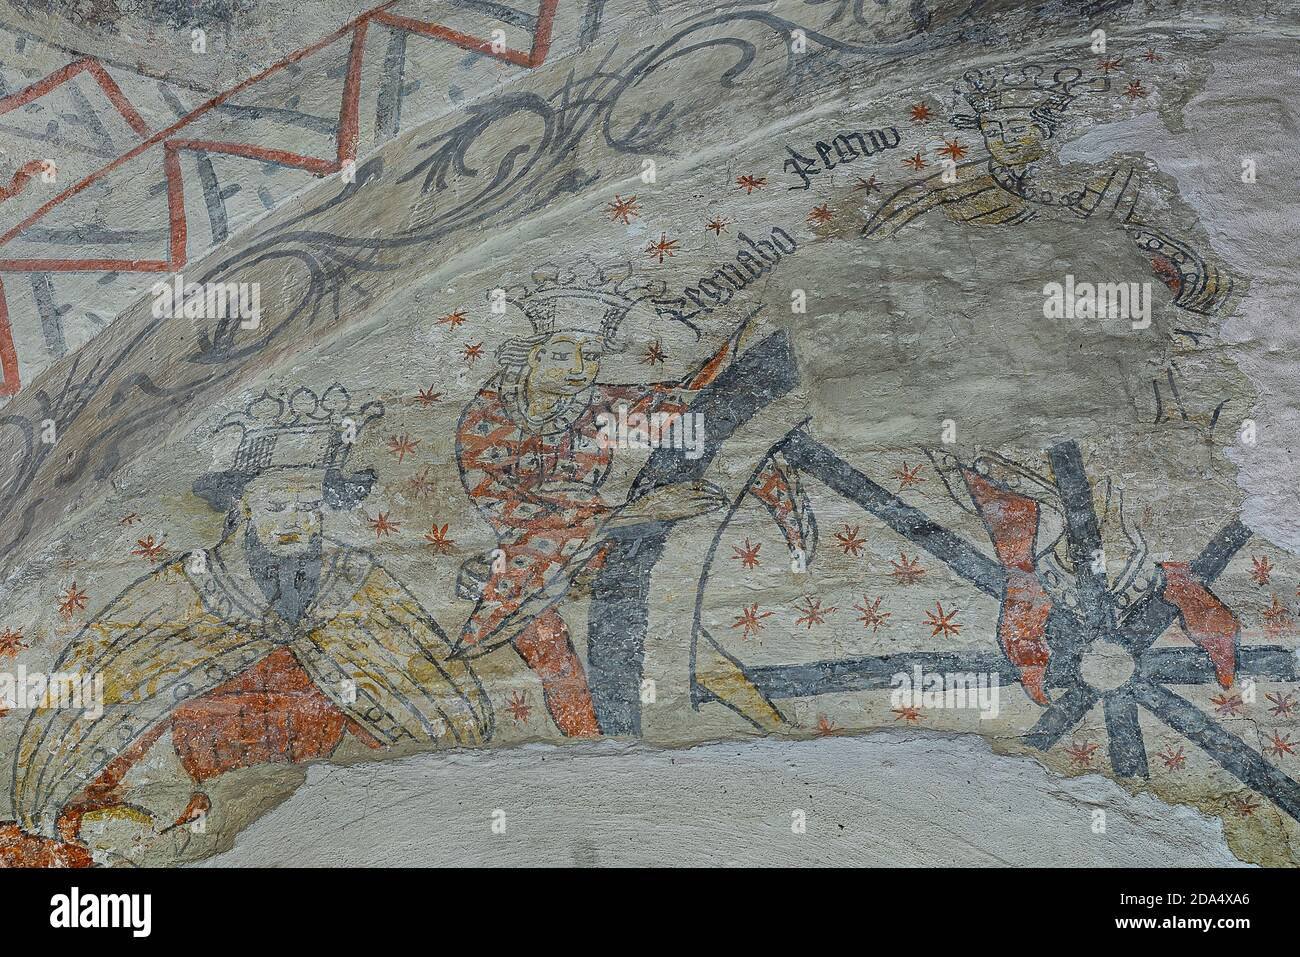 Wall-painting from 1480 of three kings at the Wheel of Fortune in Tuse church, Denmark, November 5, 2020 Stock Photo